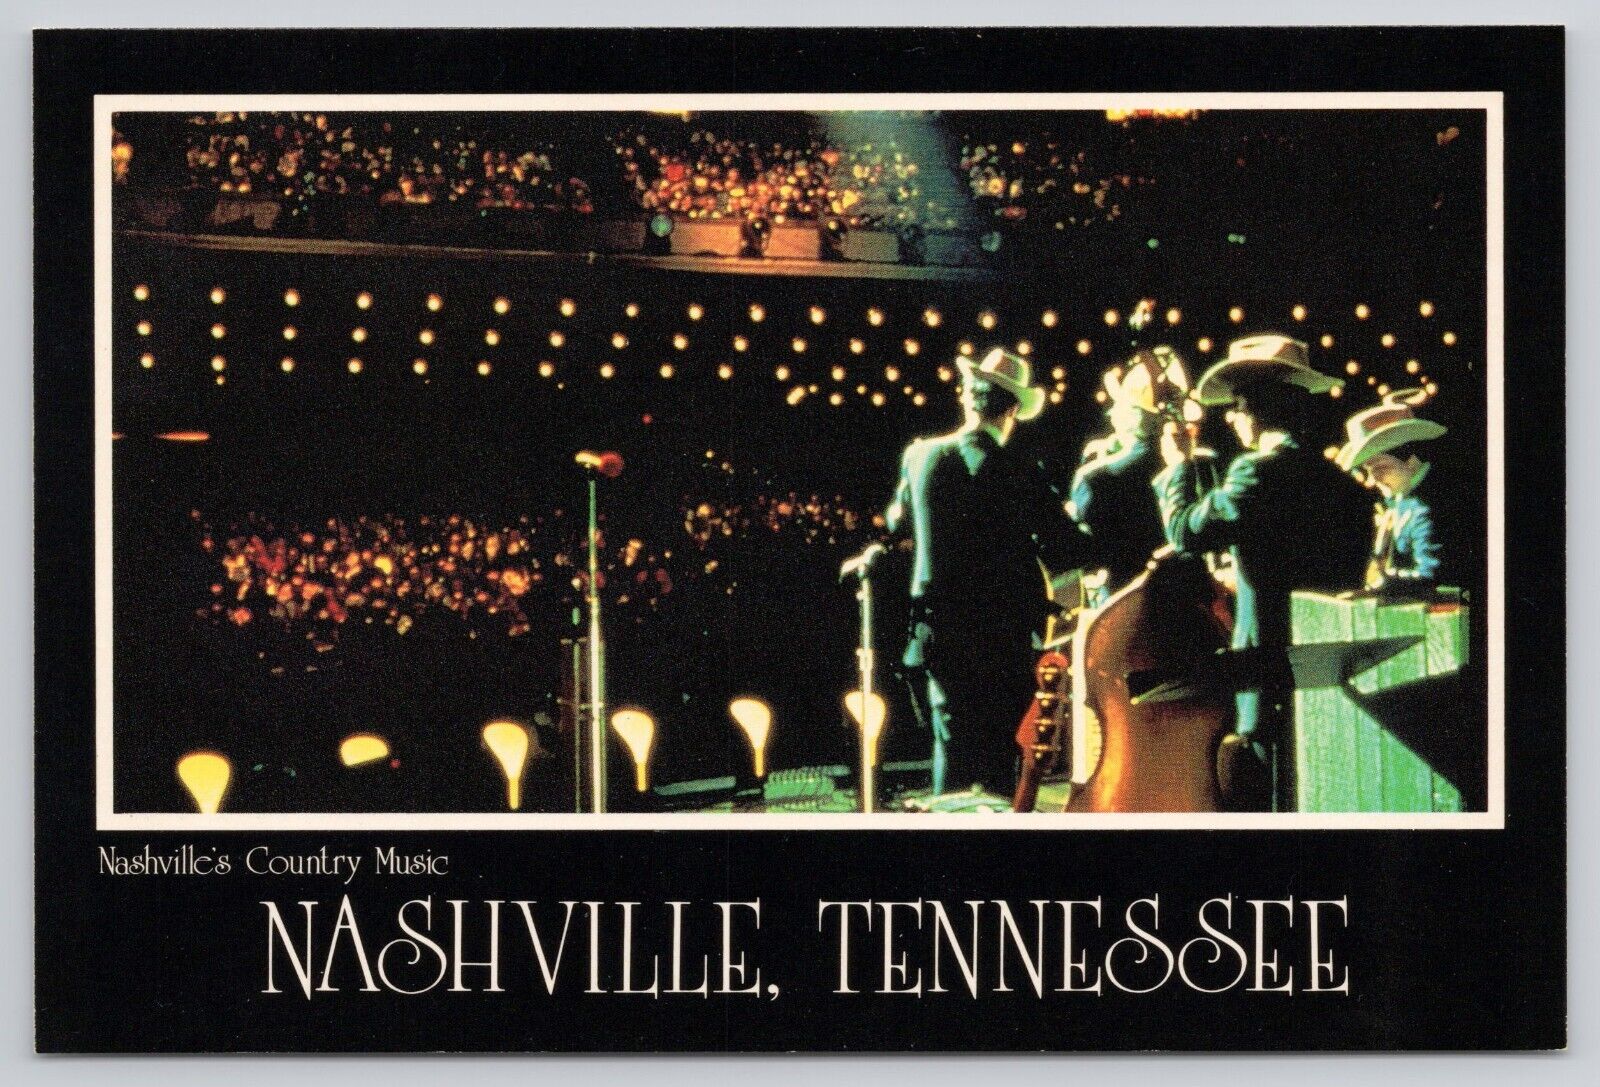 Nashville Tennessee Music City Grand Ole Opry House Performers on Stage Postcard